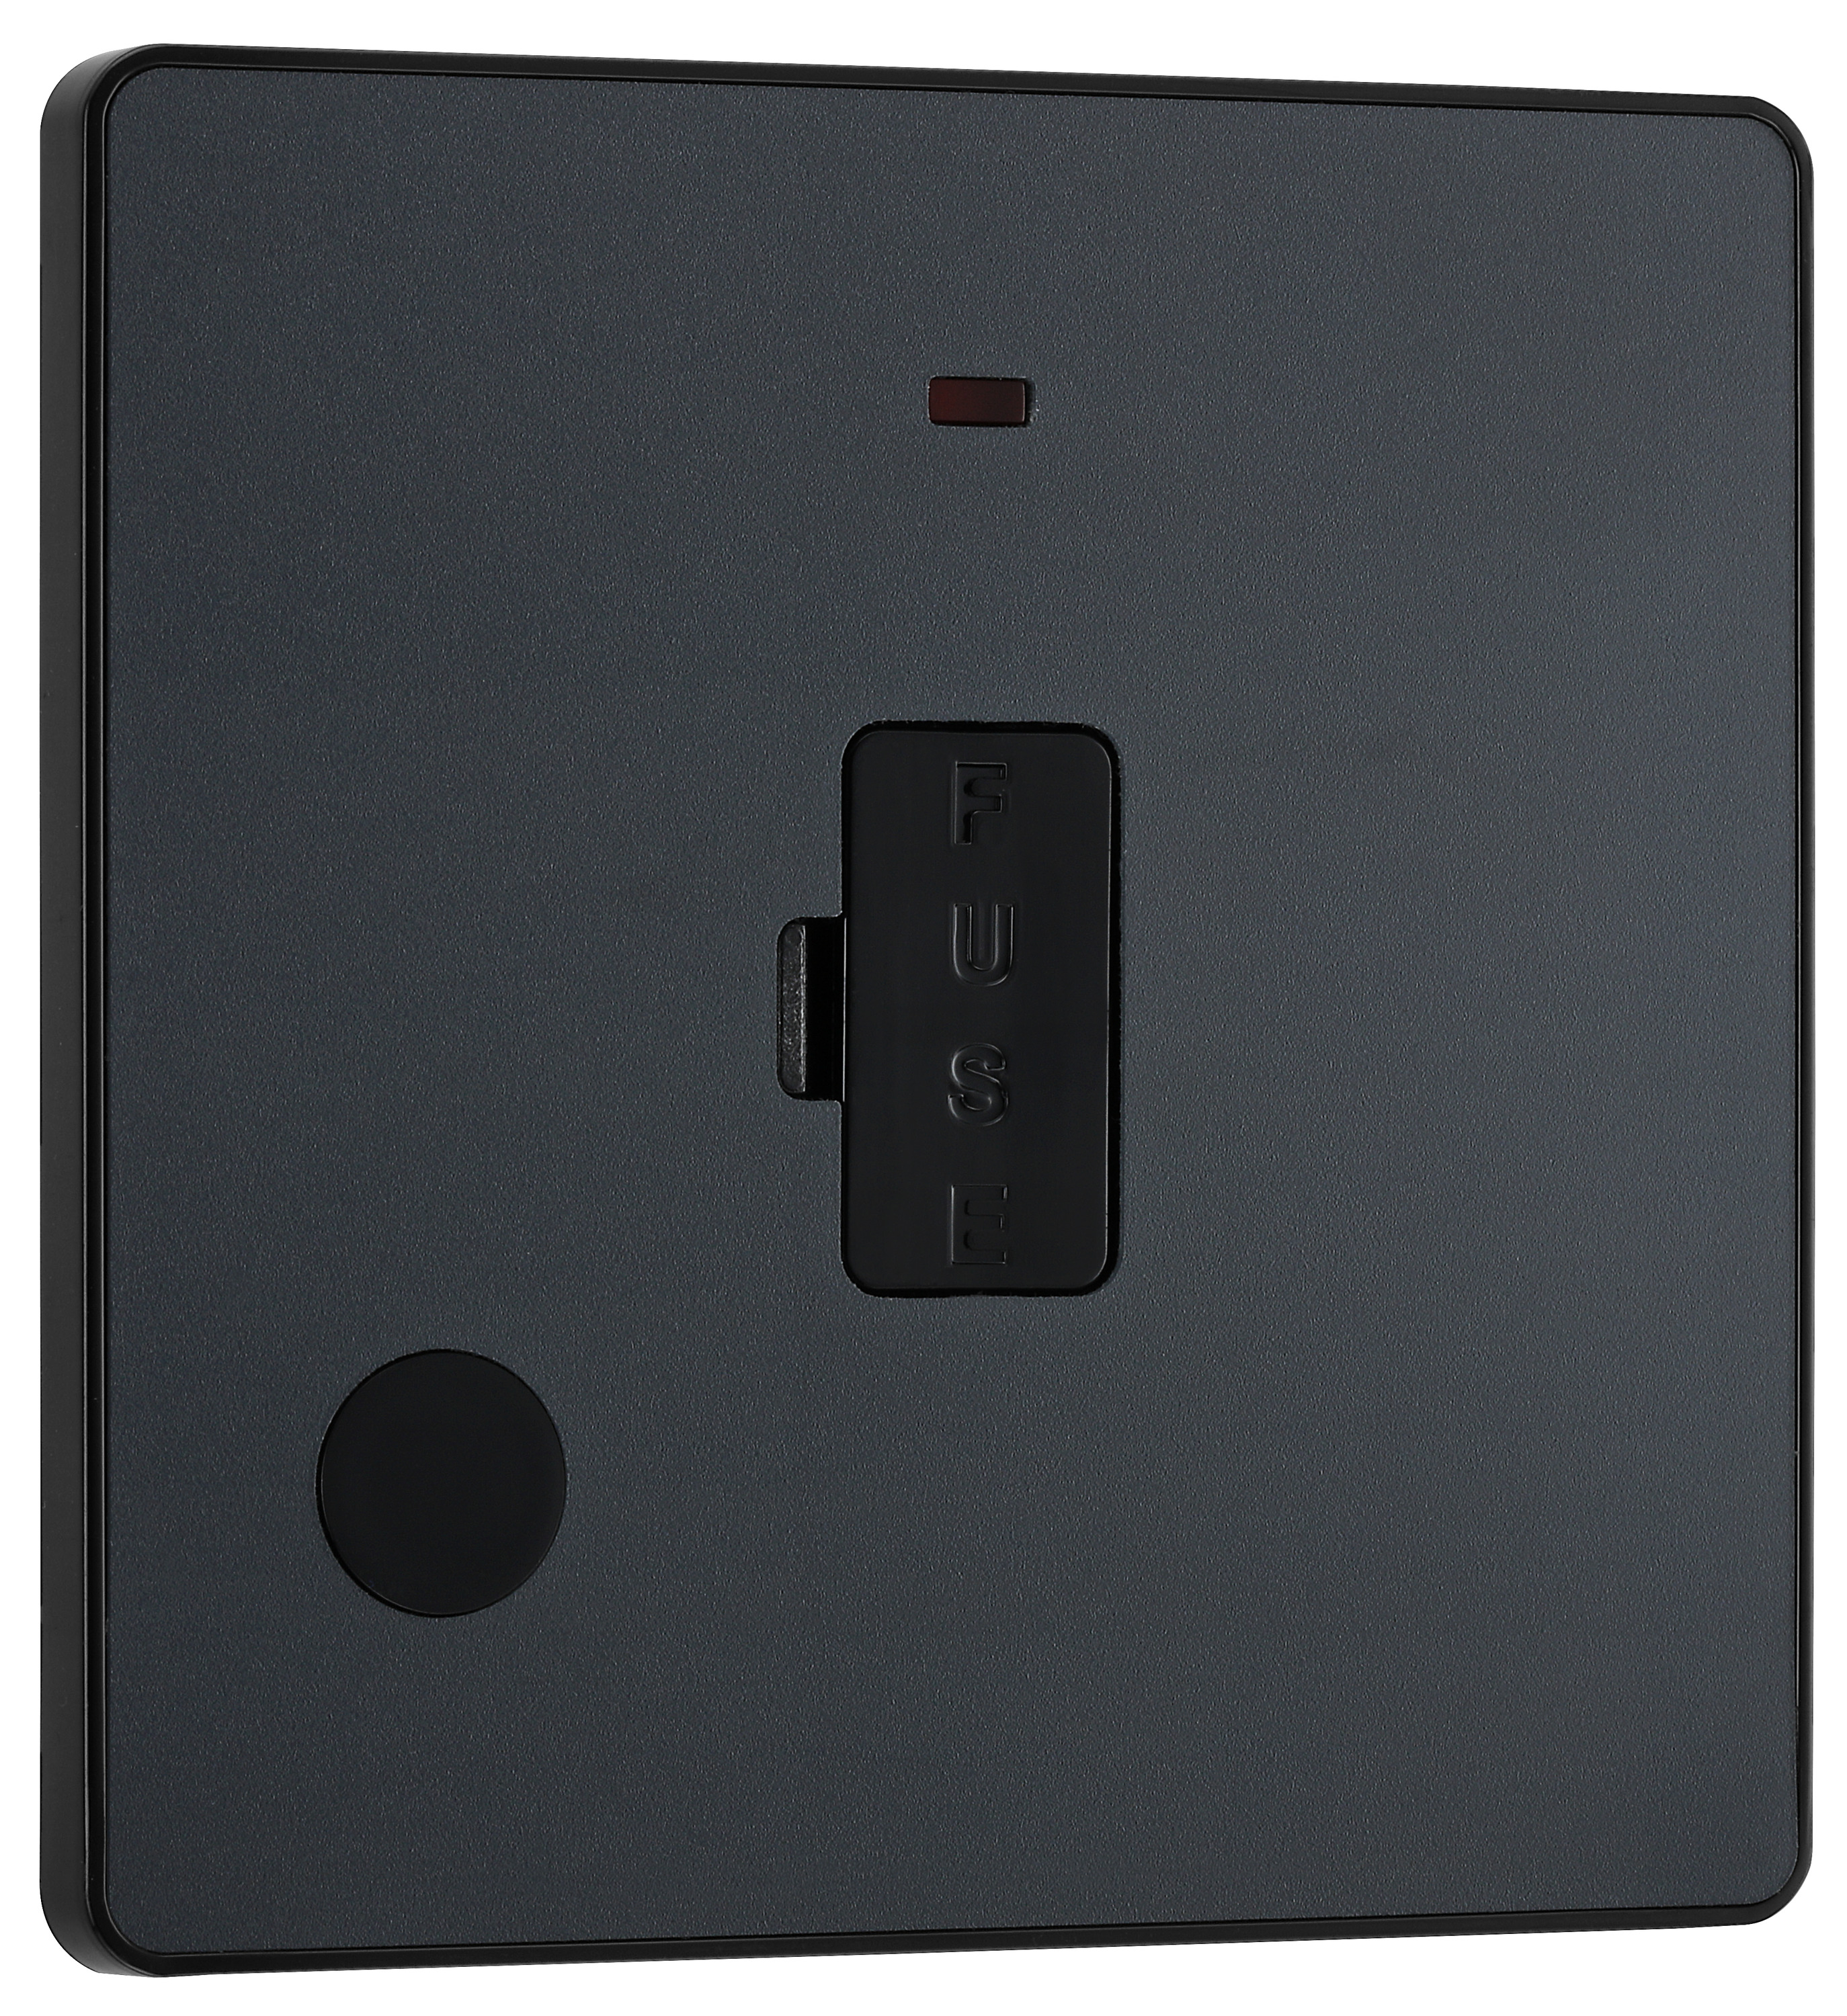 Image of BG Evolve Matt Grey 13A Unswitched Fused Connection Unit with Power Led Indicator & Flex Outlet